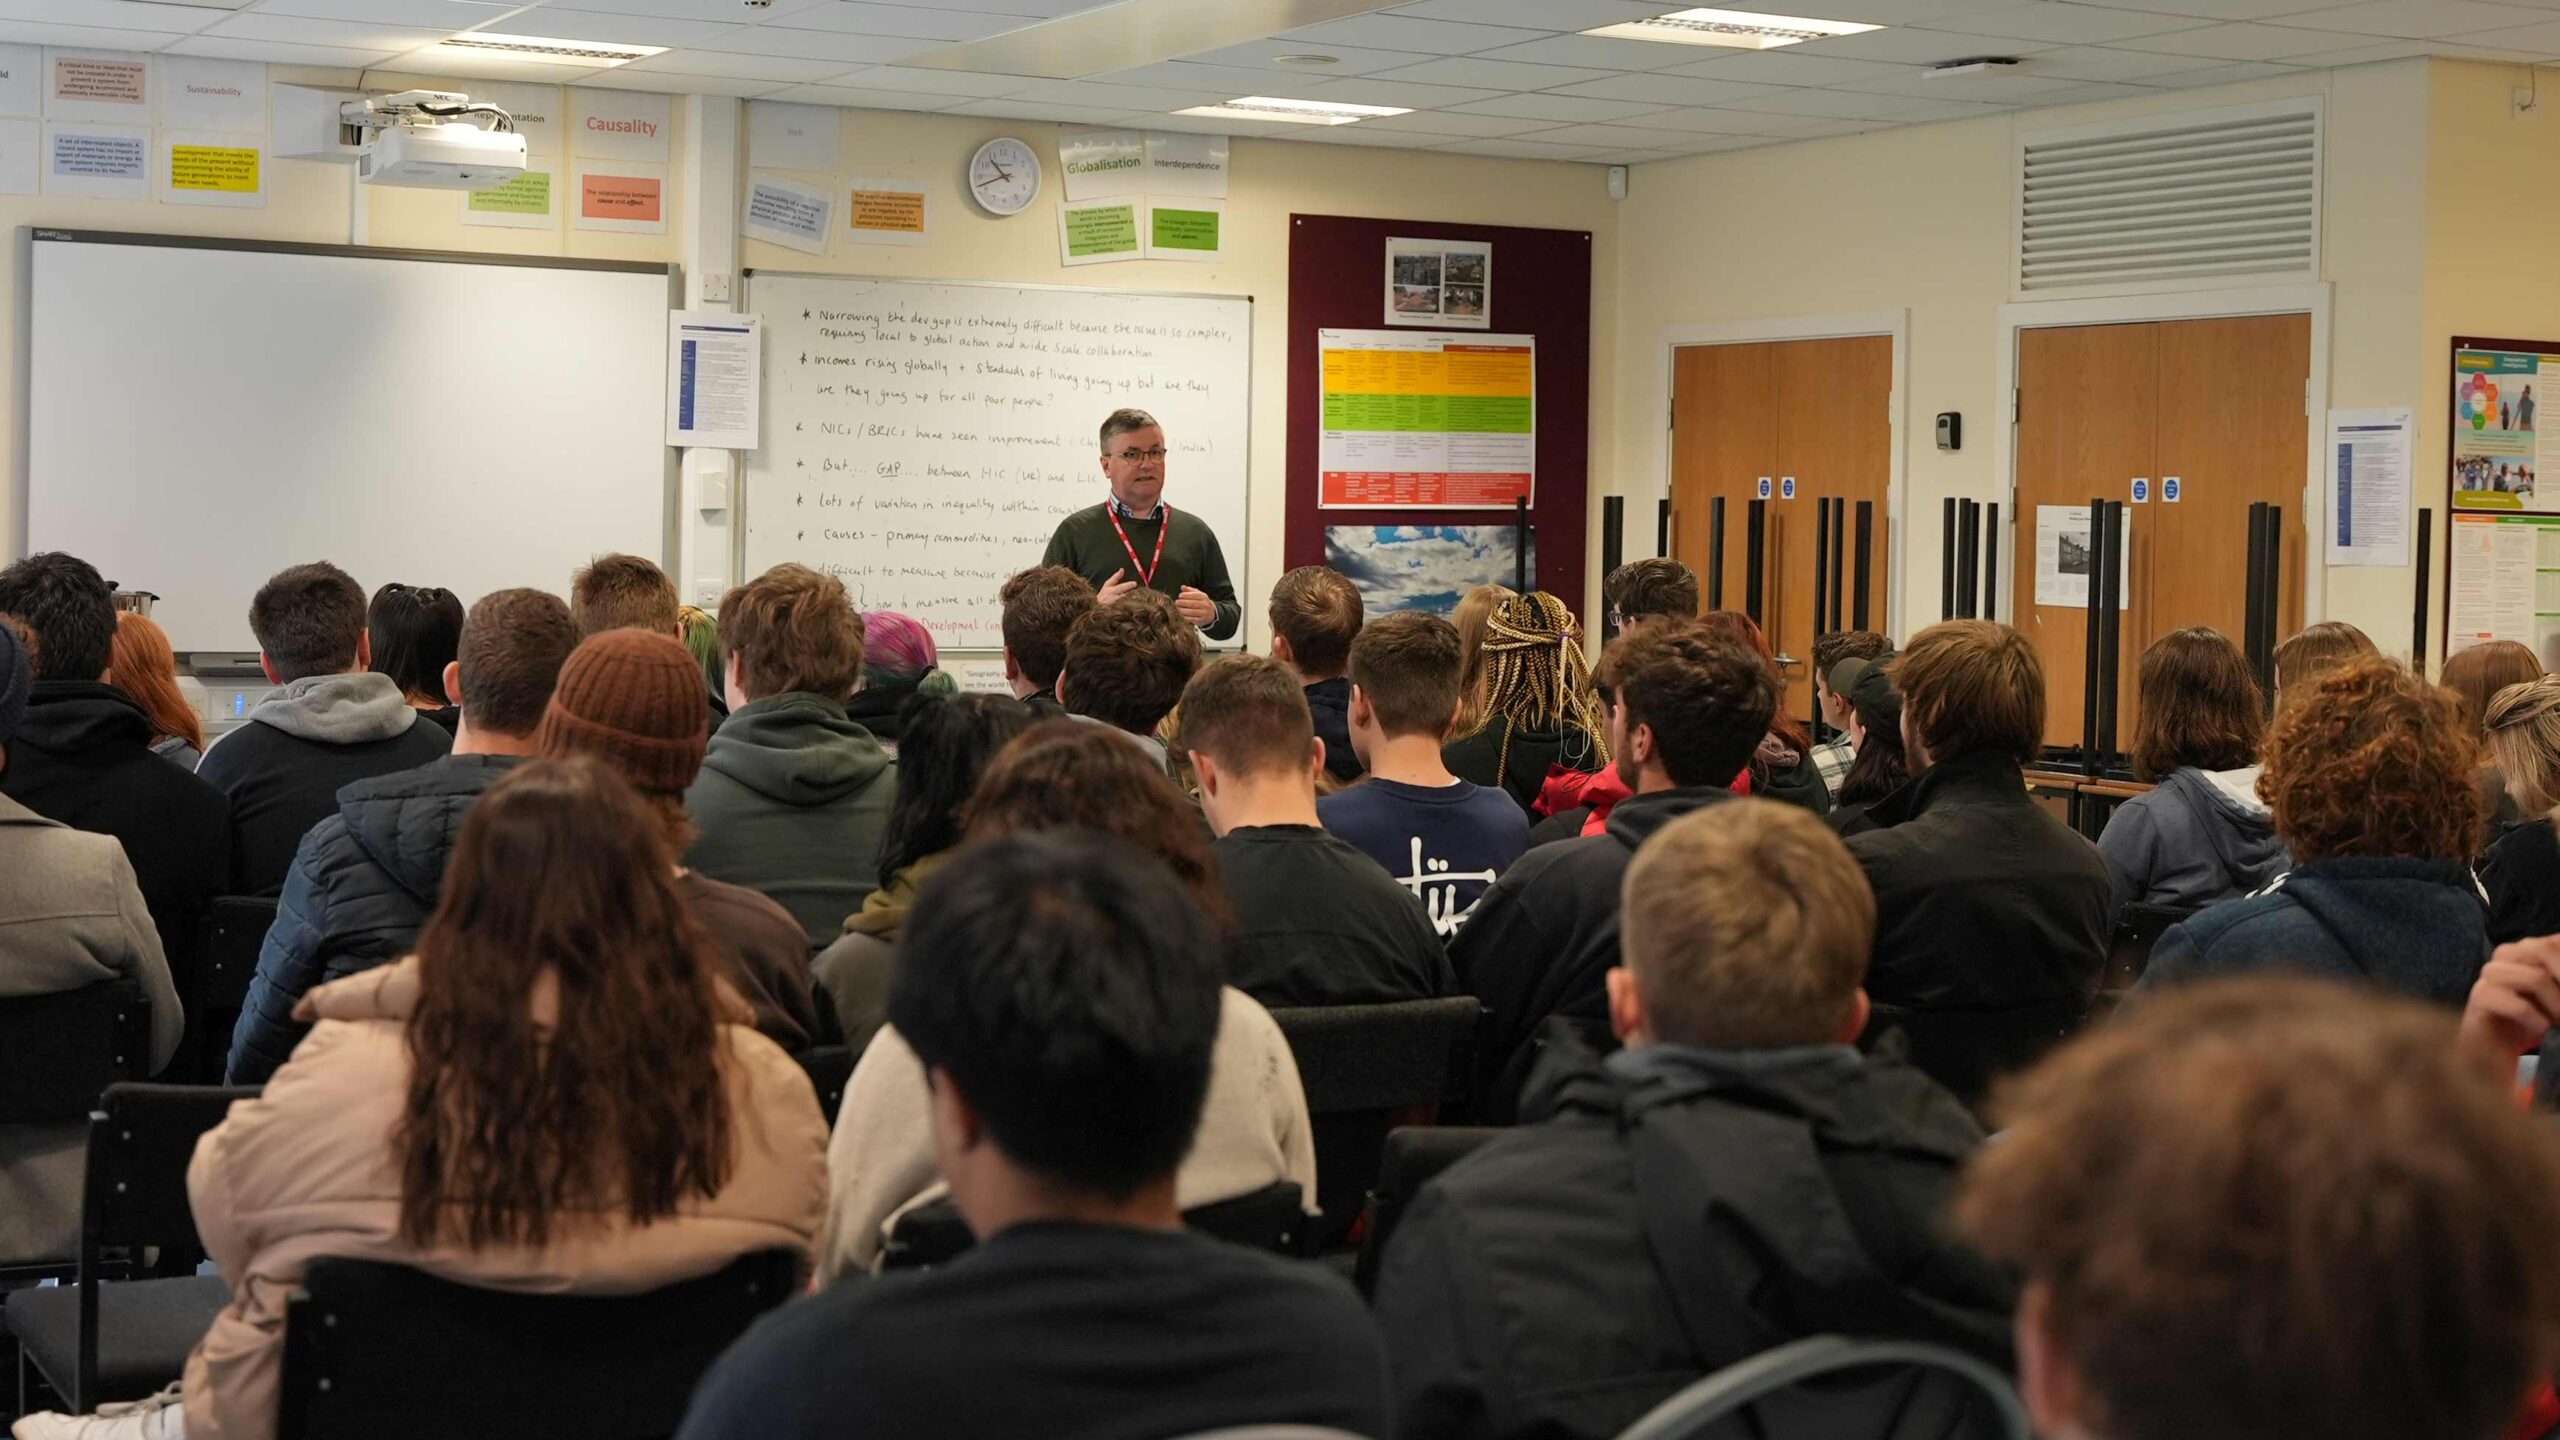 Former Lord Chancellor Robert Buckland visits Cirencester College for Parliament Week